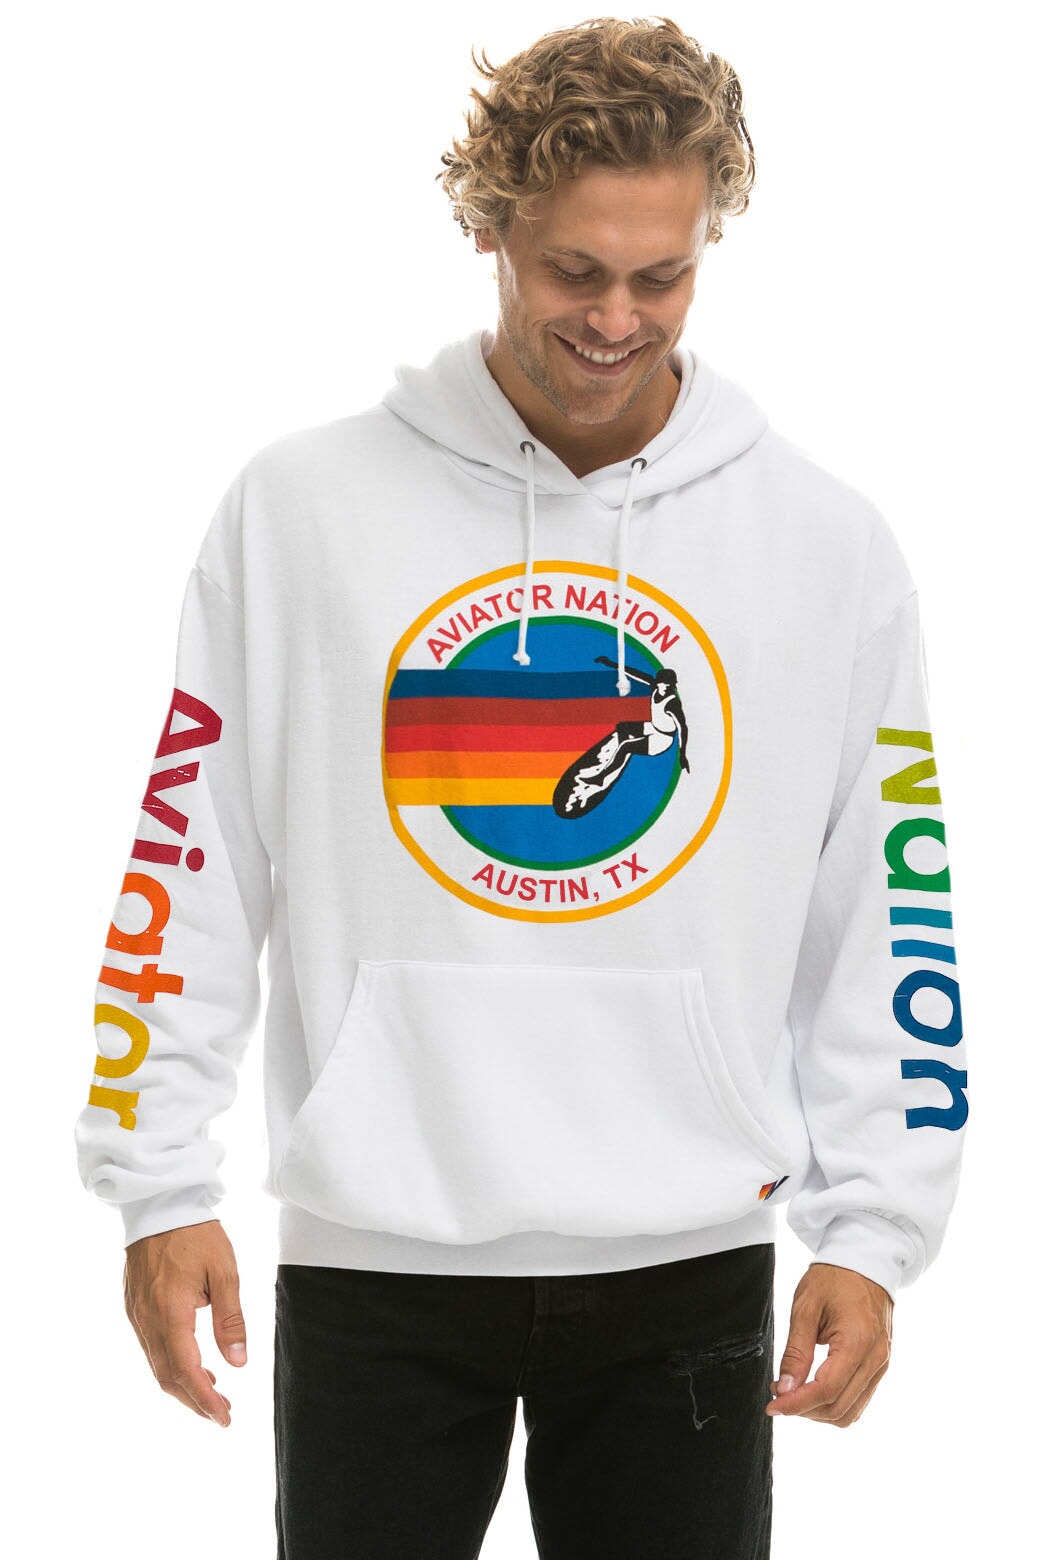 AVIATOR NATION AUSTIN RELAXED PULLOVER HOODIE - WHITE Hoodie Aviator Nation 